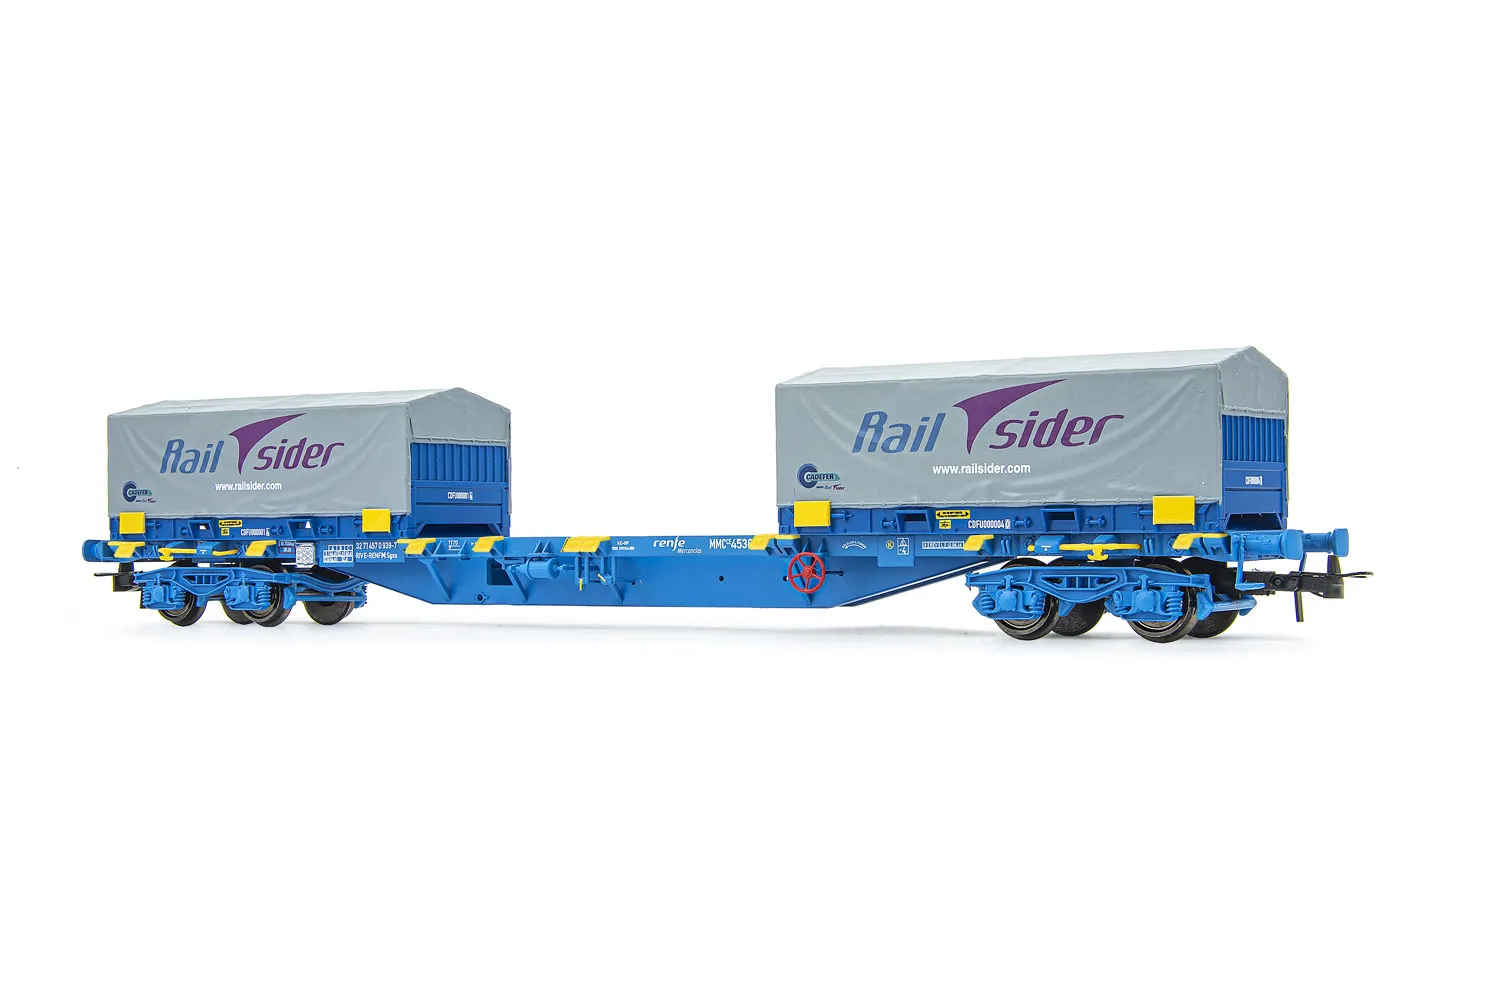 RENFE, 4-axle container wagon MMC3, blue livery, loaded with two 20’ coil containers “Cadfer/Railsider”, period VI